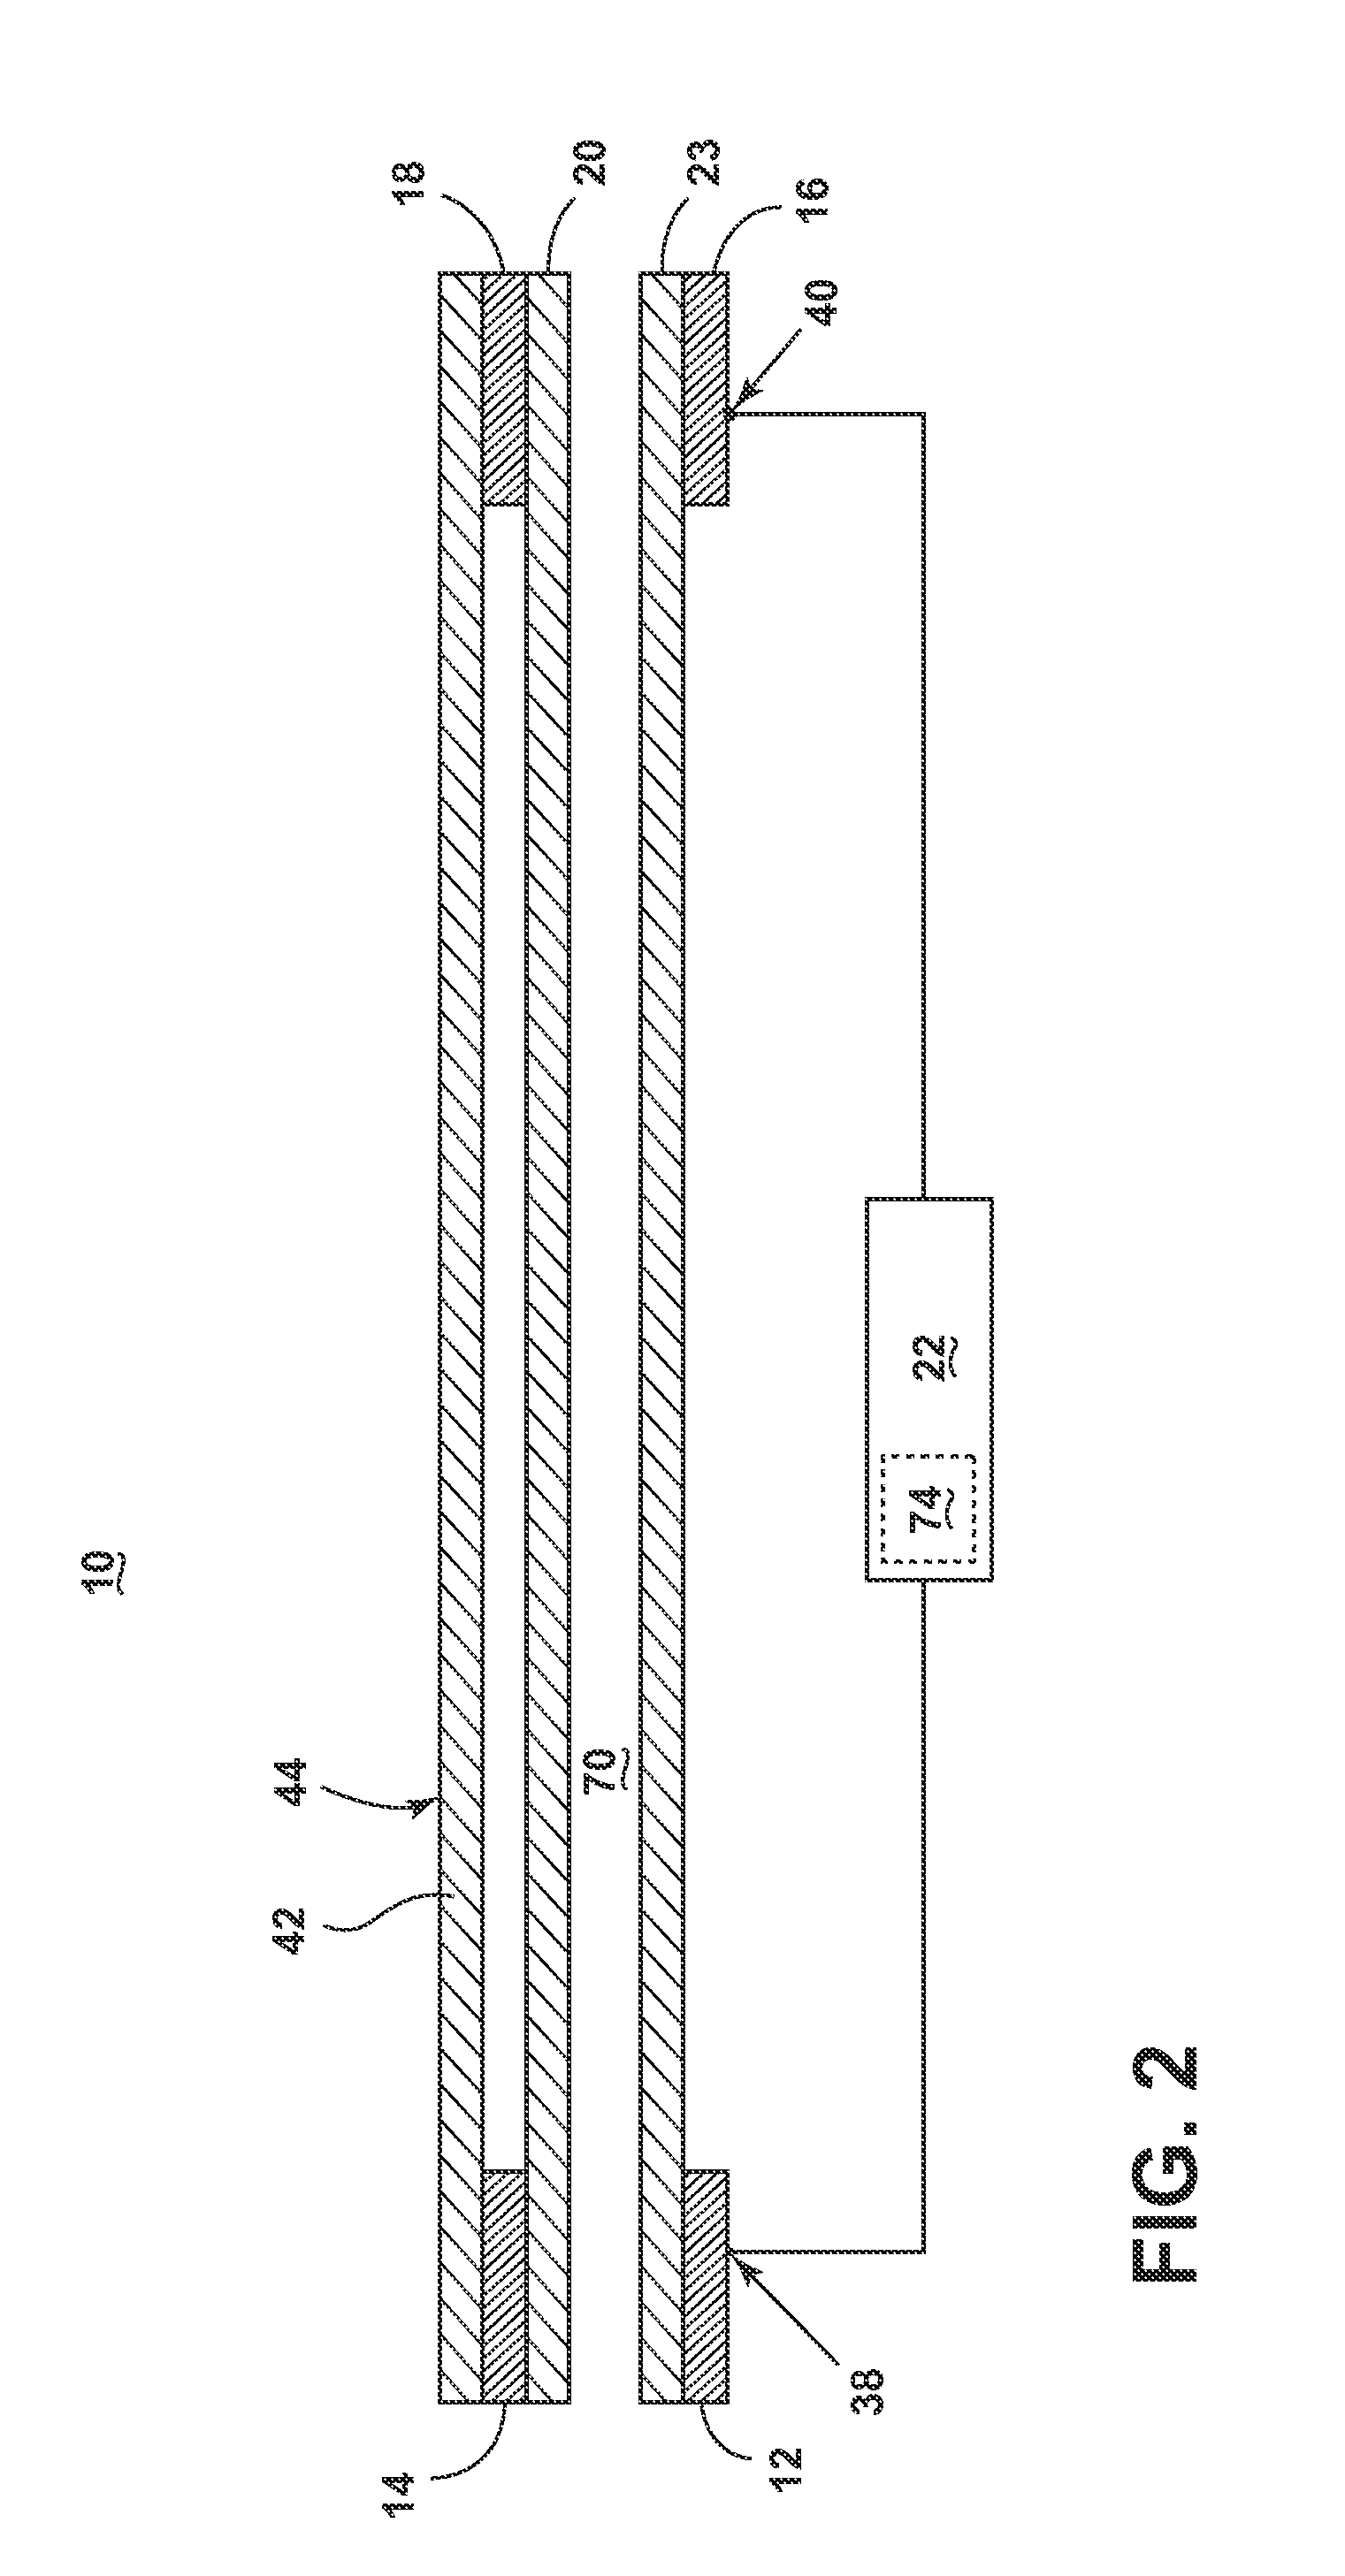 Method and apparatus for drying articles